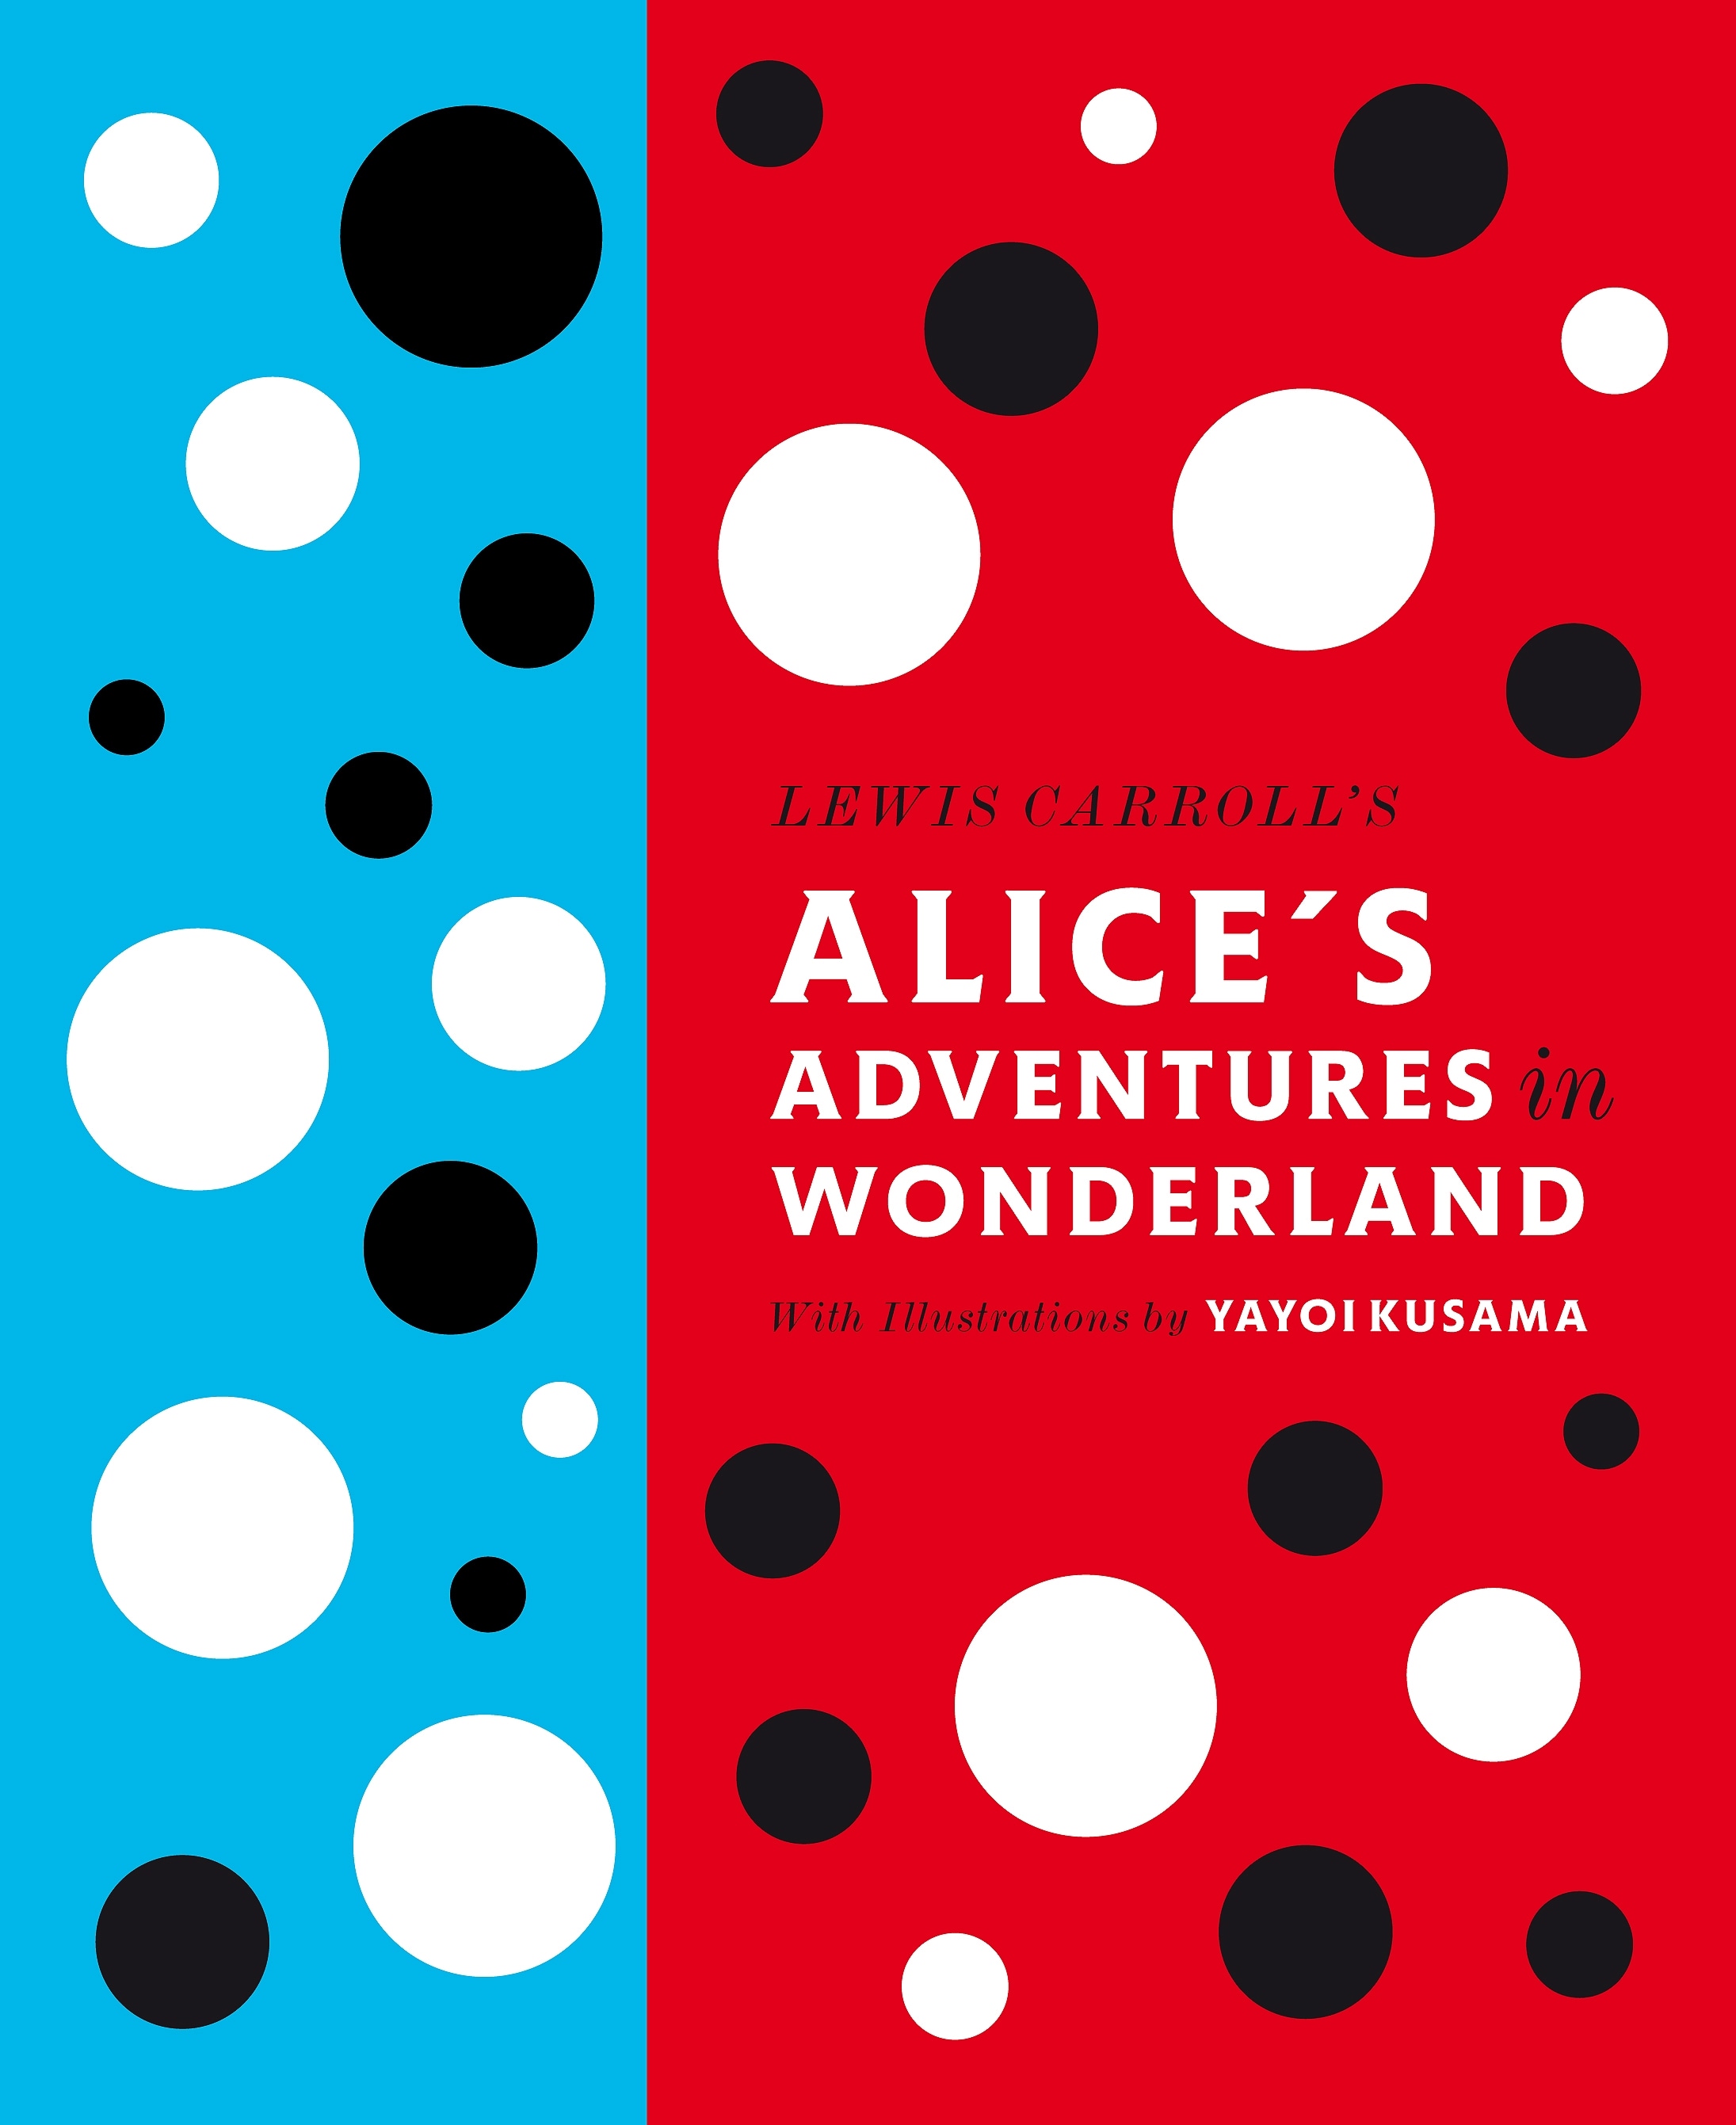 Book “Lewis Carroll's Alice's Adventures in Wonderland: With Artwork by Yayoi Kusama” by Lewis Carroll — February 2, 2012